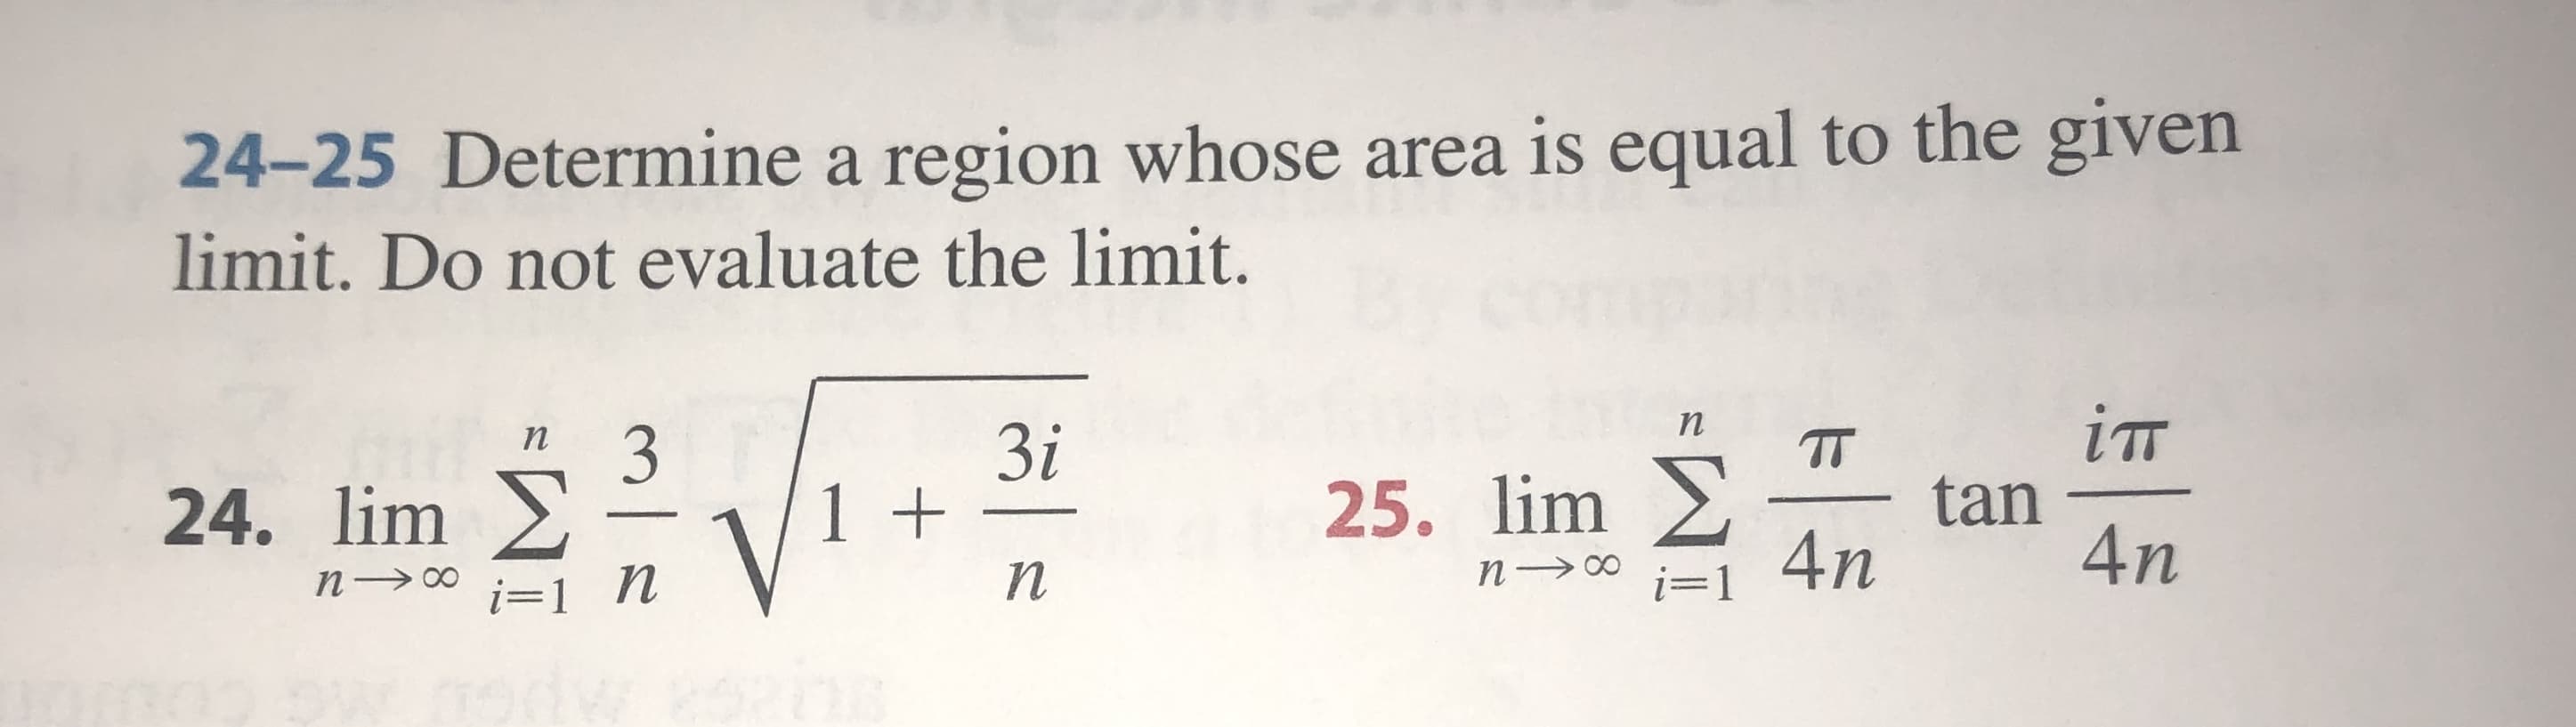 24-25 Determine a region whose area is equal to the given
limit. Do not evaluate the limit.
iT
п
3і
1 +
3
24. limX
T
tan
25. lim
4n
4n
n co
n
п
i=1
n oo
i=
